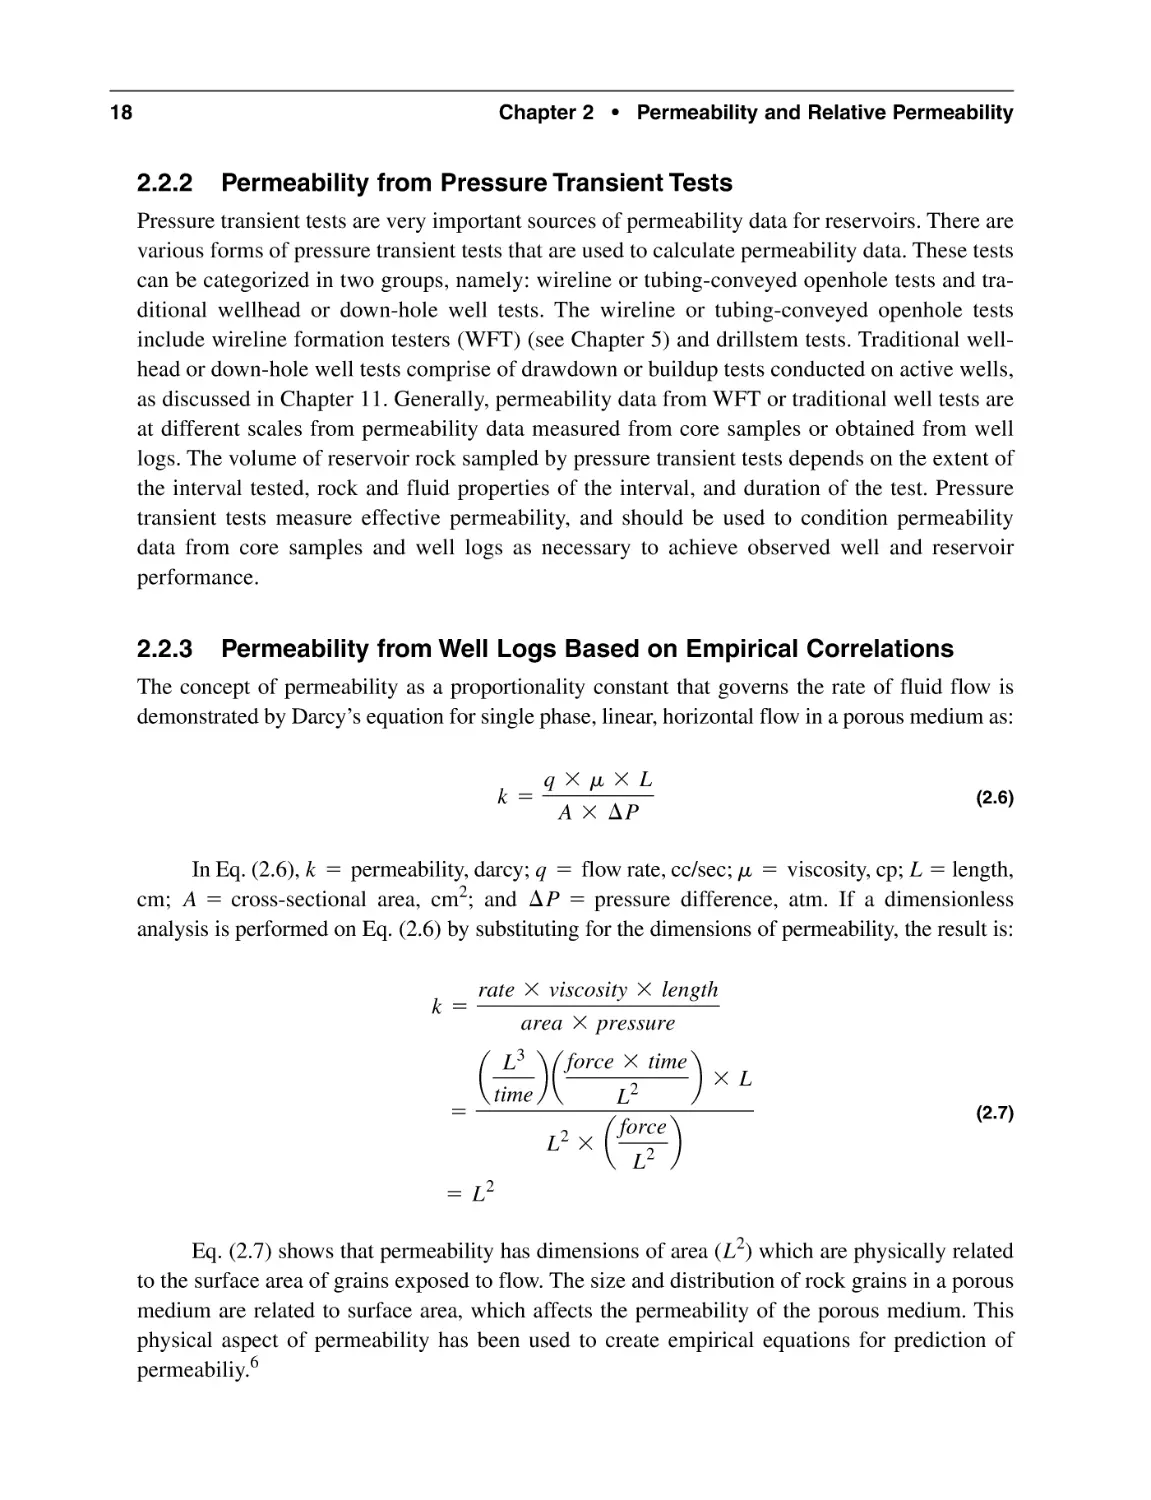 2.2.2 Permeability from Pressure Transient Tests
2.2.3 Permeability from Well Logs Based on Empirical Correlations